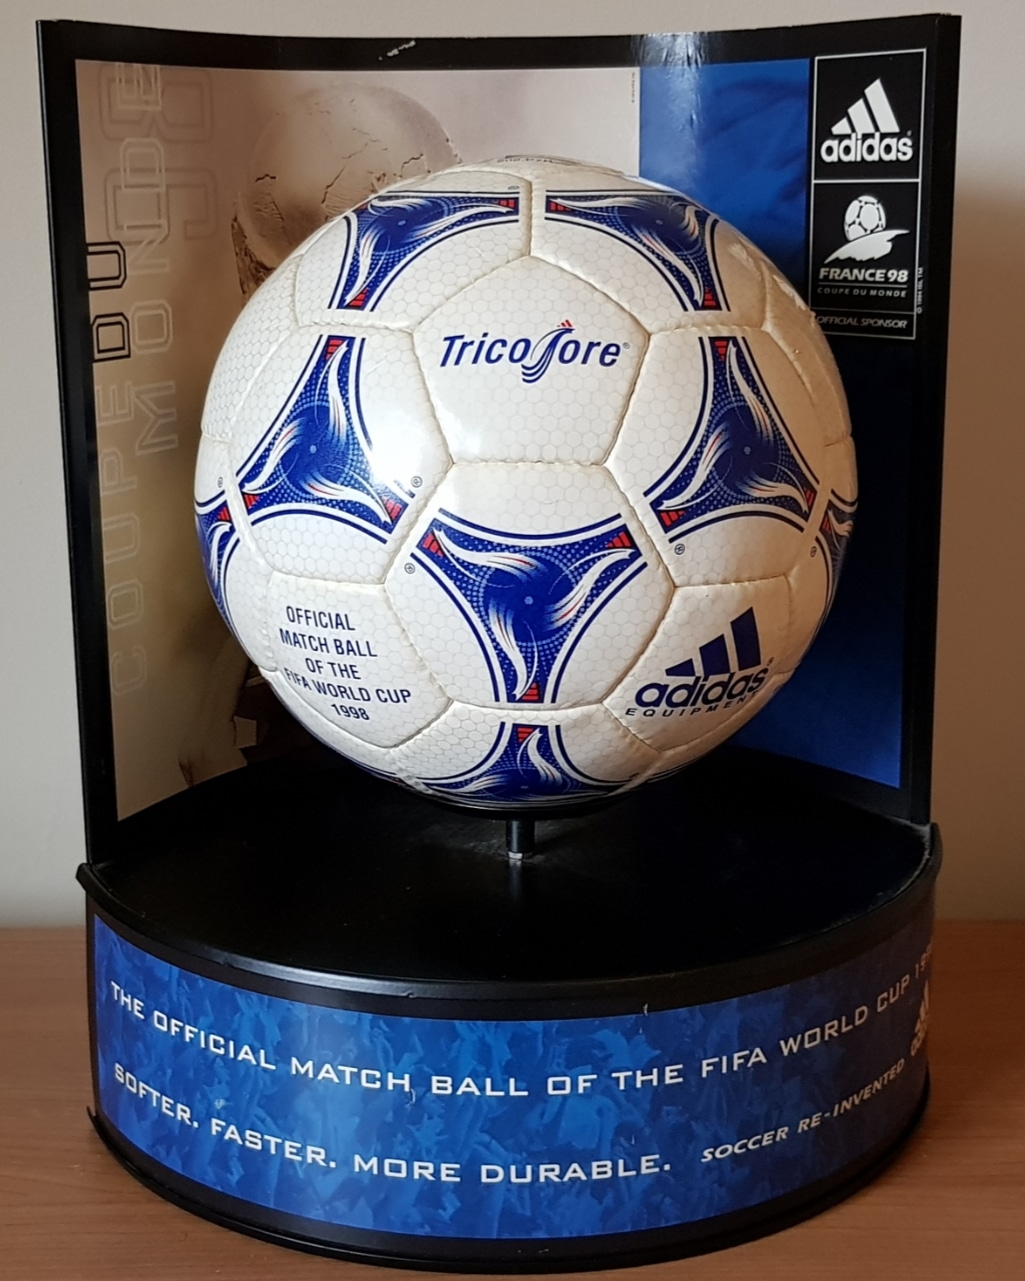 Descarga Vacilar sencillo Rob Filby on Twitter: "Adidas Tricolore 1998 World Cup Official Match Ball  #france98 #adidastricolre #officialmatchball https://t.co/j9wnIQFMdh" /  Twitter